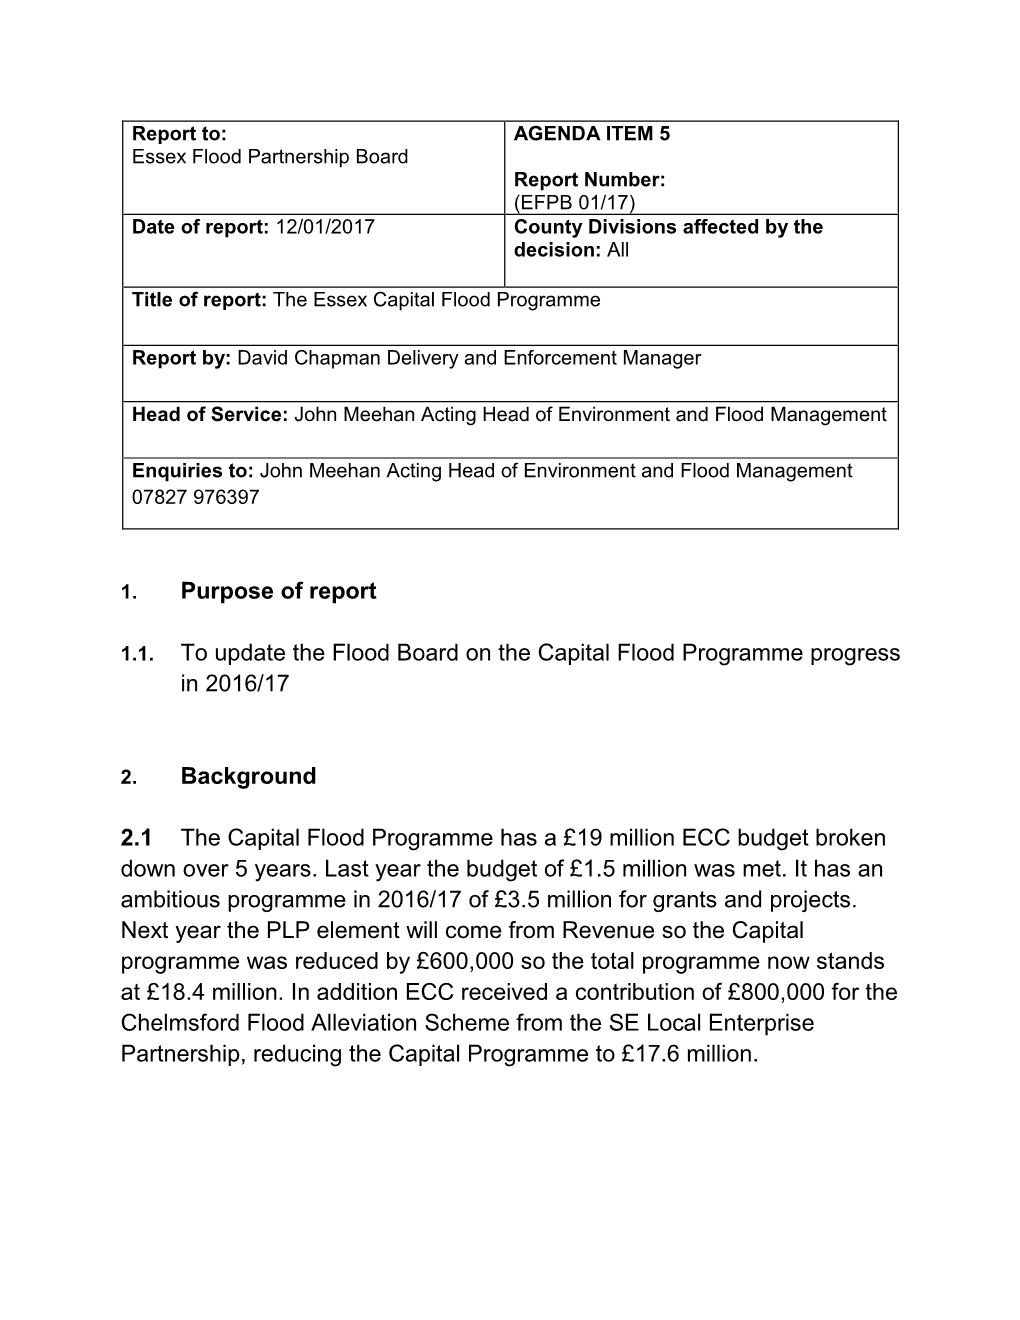 Purpose of Report 1.1. to Update the Flood Board on the Capital Flood Programme Progress in 2016/17 Background 2.1 the Capital F